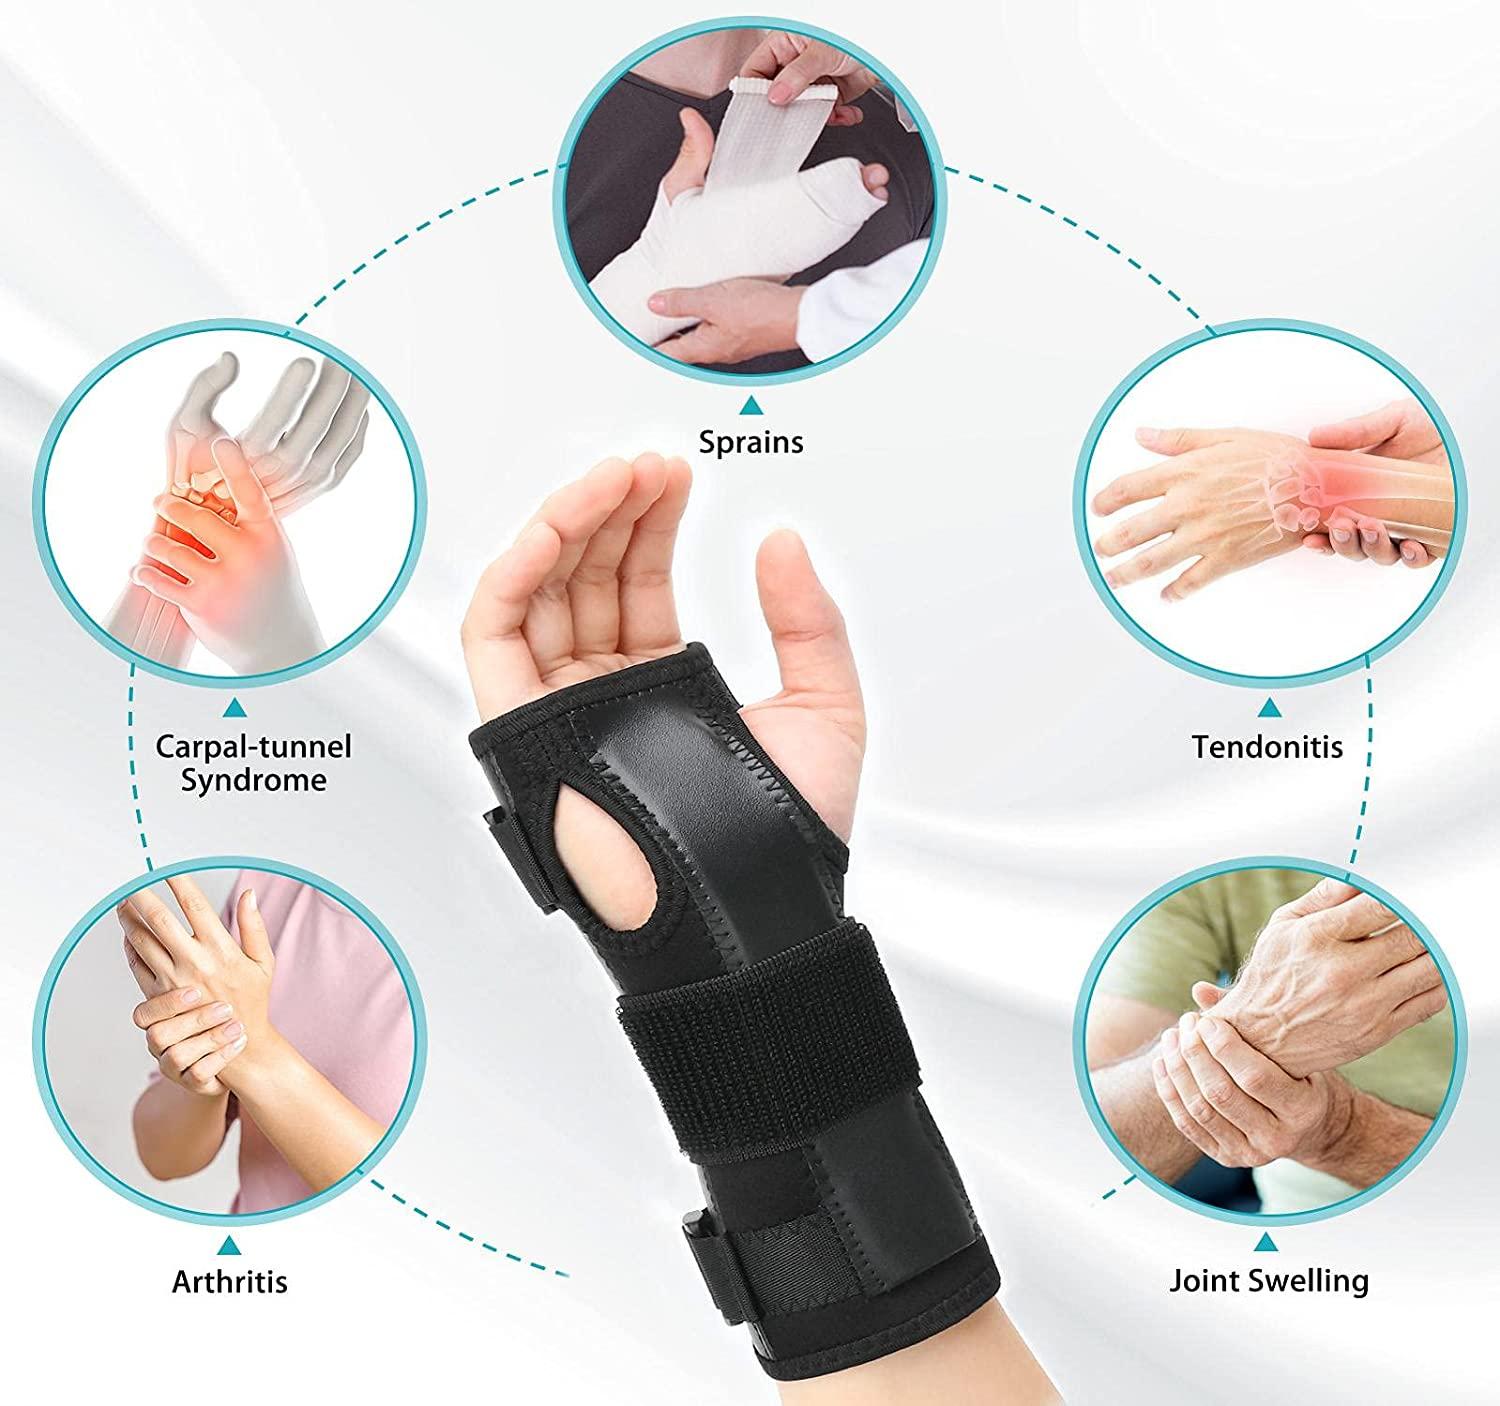 Wrist Splint for Carpal-Tunnel Syndrome by PKSTONE Adjustable